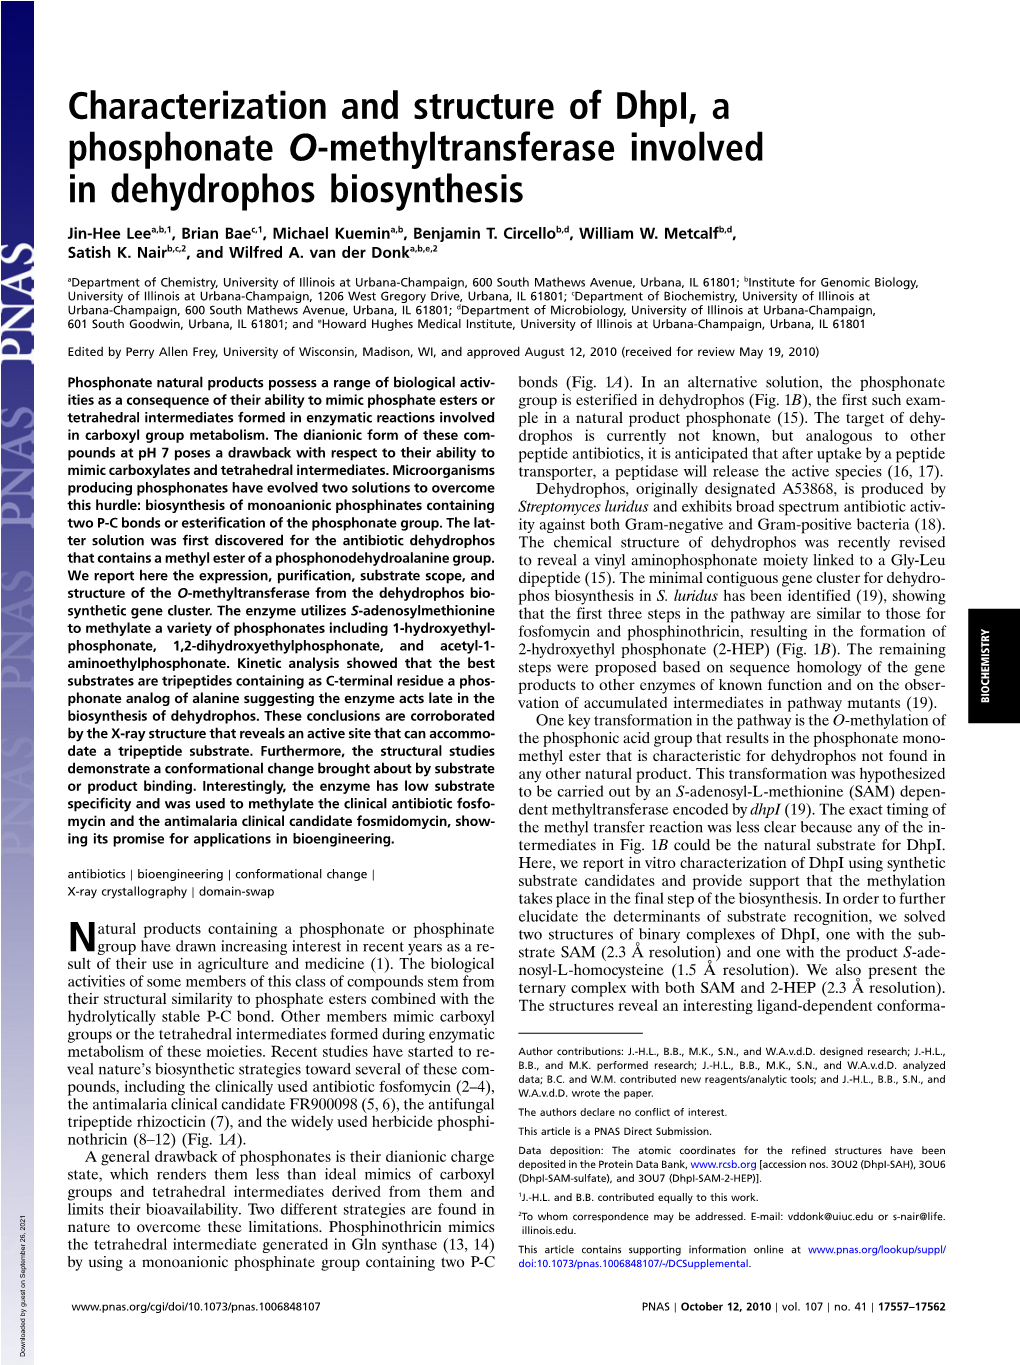 Characterization and Structure of Dhpi, a Phosphonate O-Methyltransferase Involved in Dehydrophos Biosynthesis